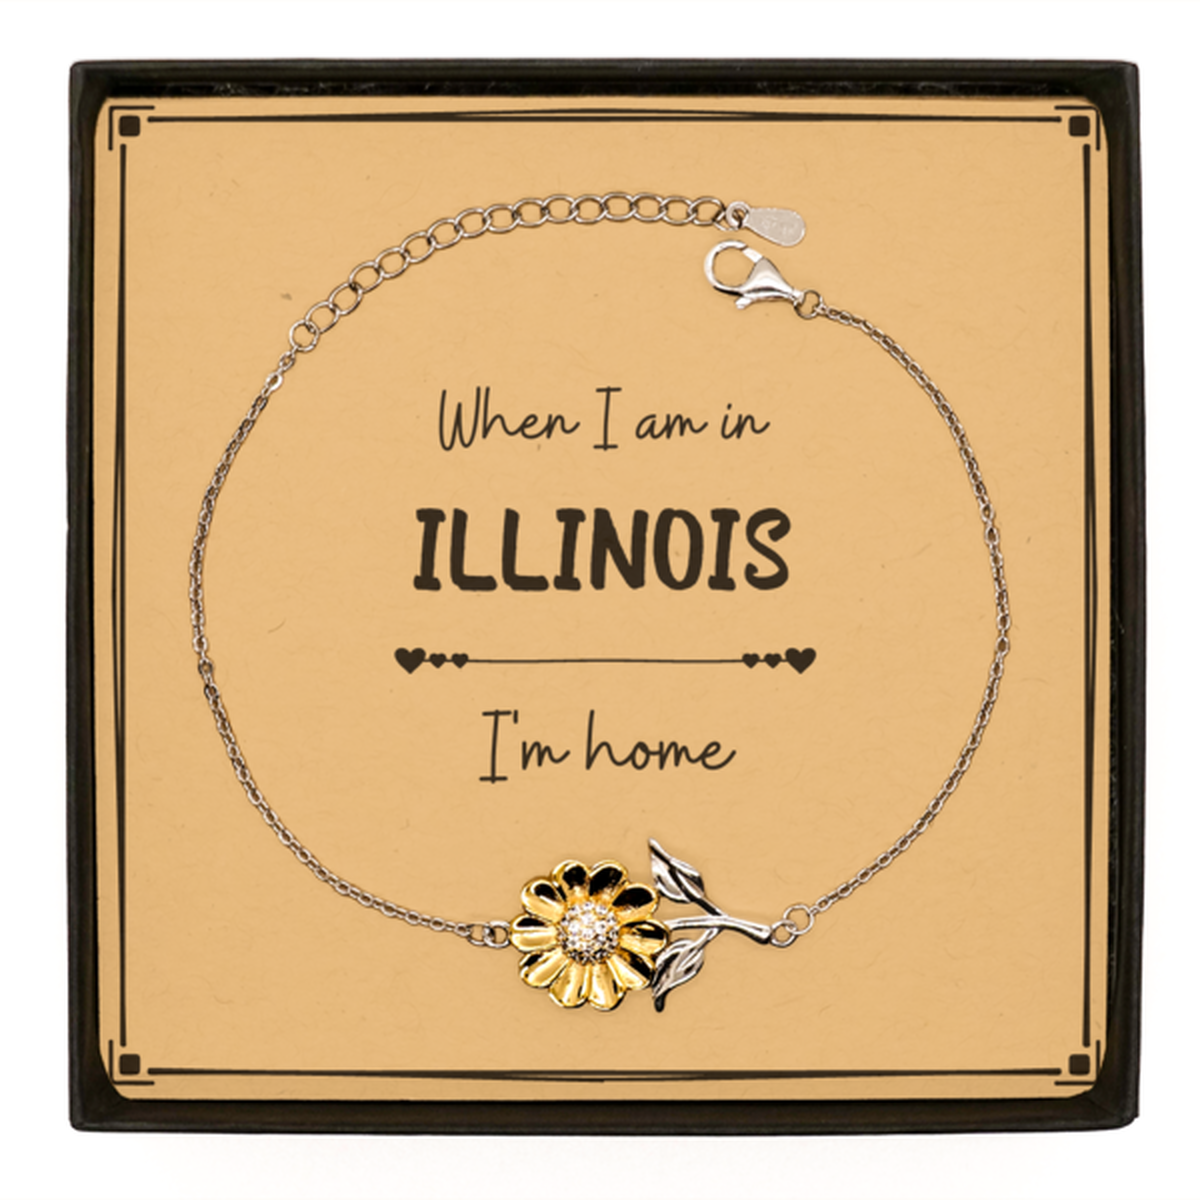 When I am in Illinois I'm home Sunflower Bracelet, Message Card Gifts For Illinois, State Illinois Birthday Gifts for Friends Coworker